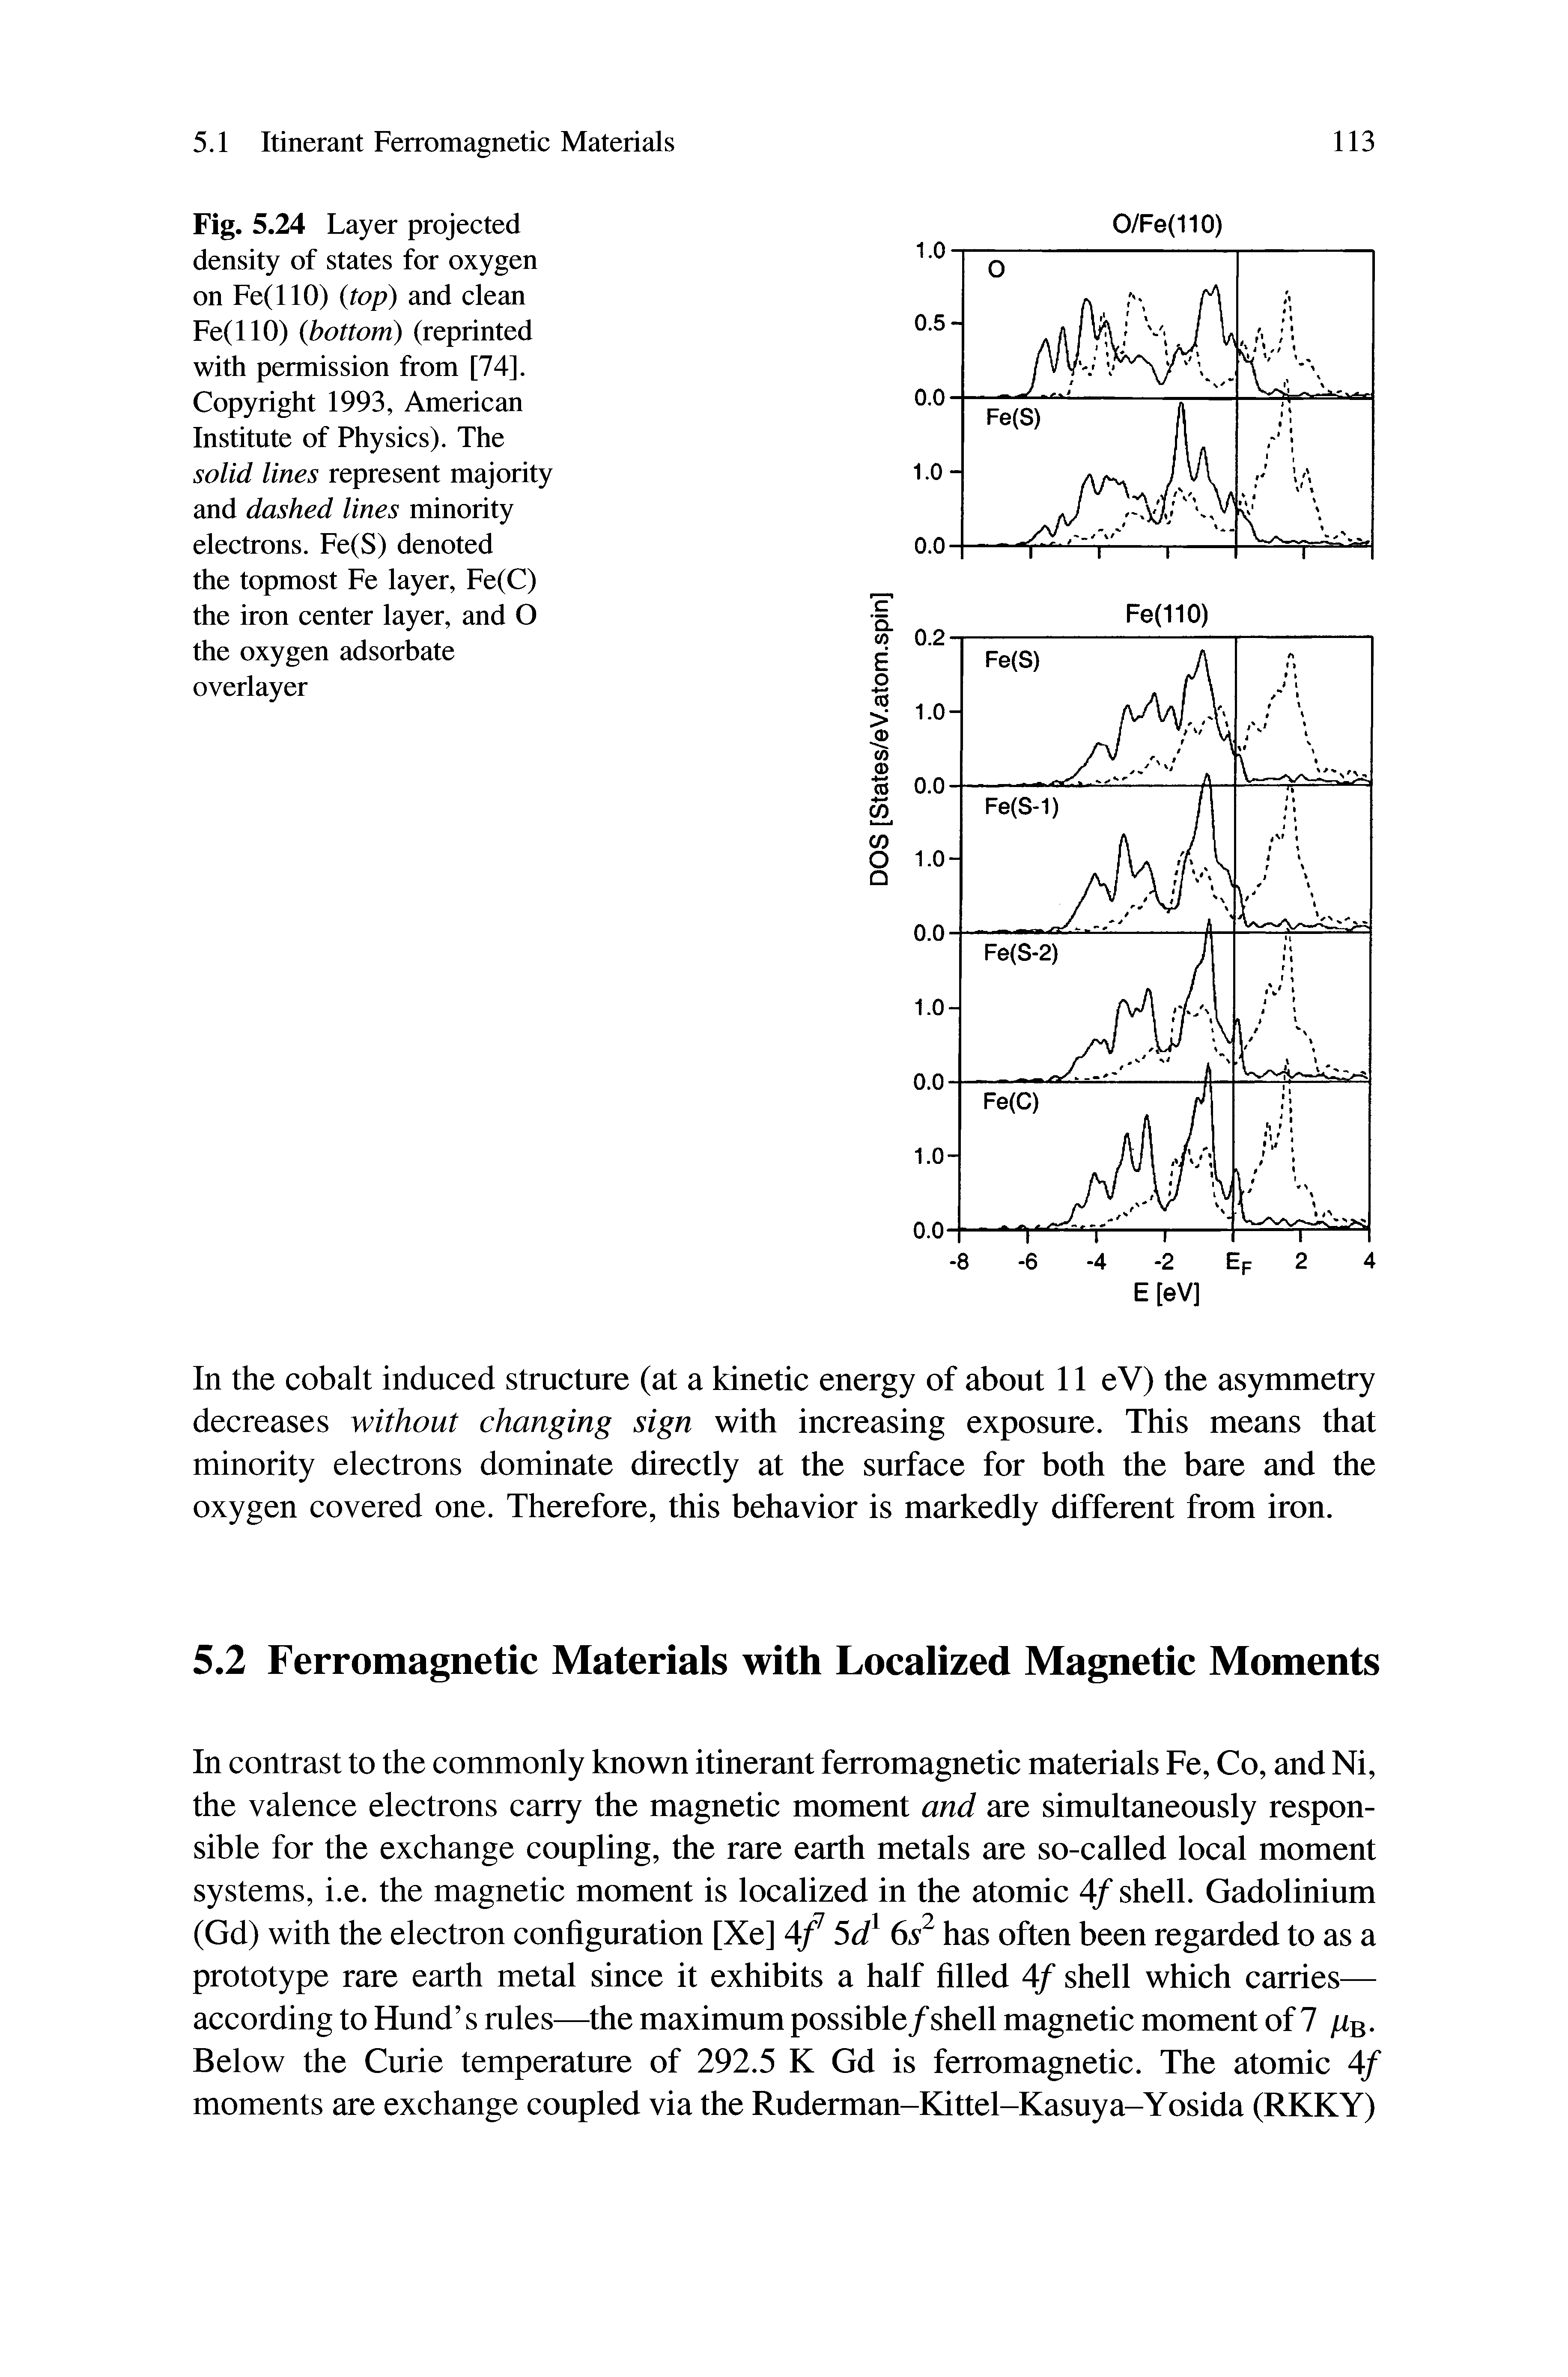 Fig. 5.24 Layer projected density of states for oxygen on Fe(llO) top) and clean Fe(llO) bottom) (reprinted with permission from [74]. Copyright 1993, American Institute of Physics). The solid lines represent majority and dashed lines minority electrons. Fe(S) denoted the topmost Fe layer, Fe(C) the iron center layer, and O the oxygen adsorbate overlayer...